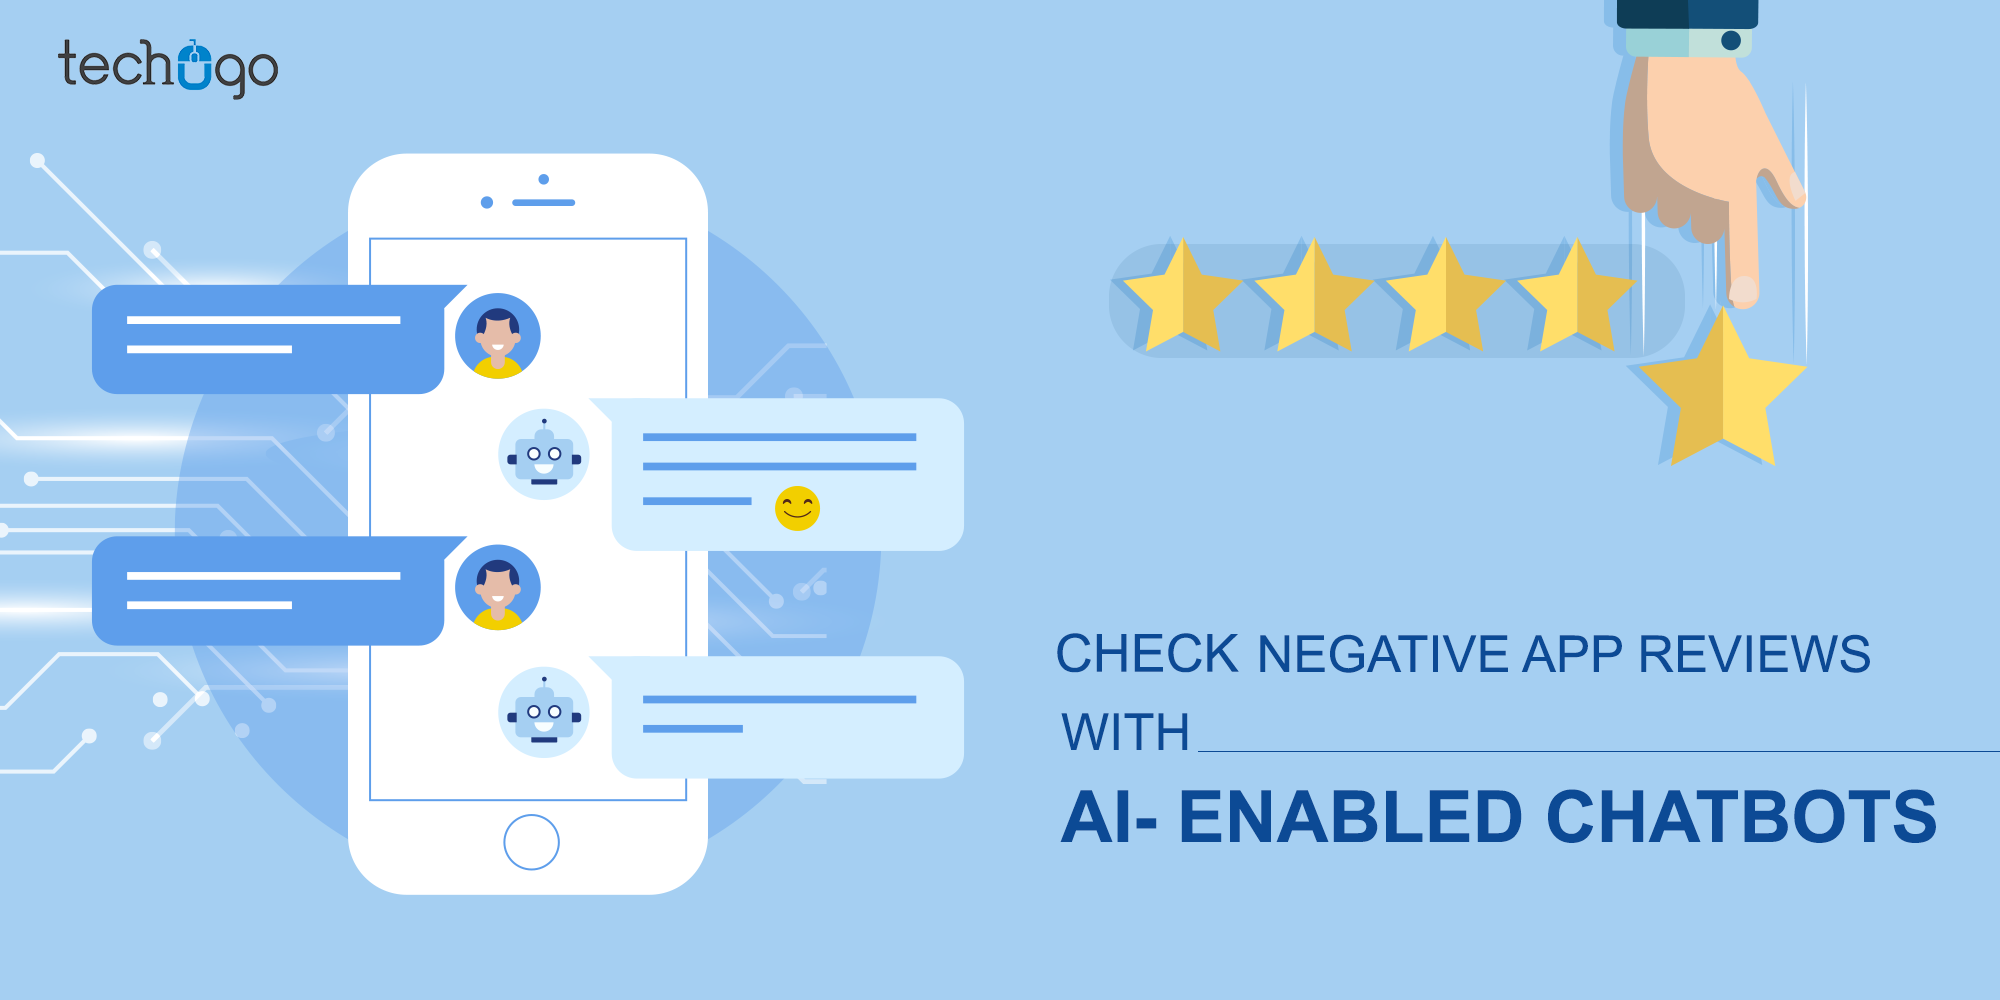 Check Negative App Reviews With AI- Enabled Chatbots